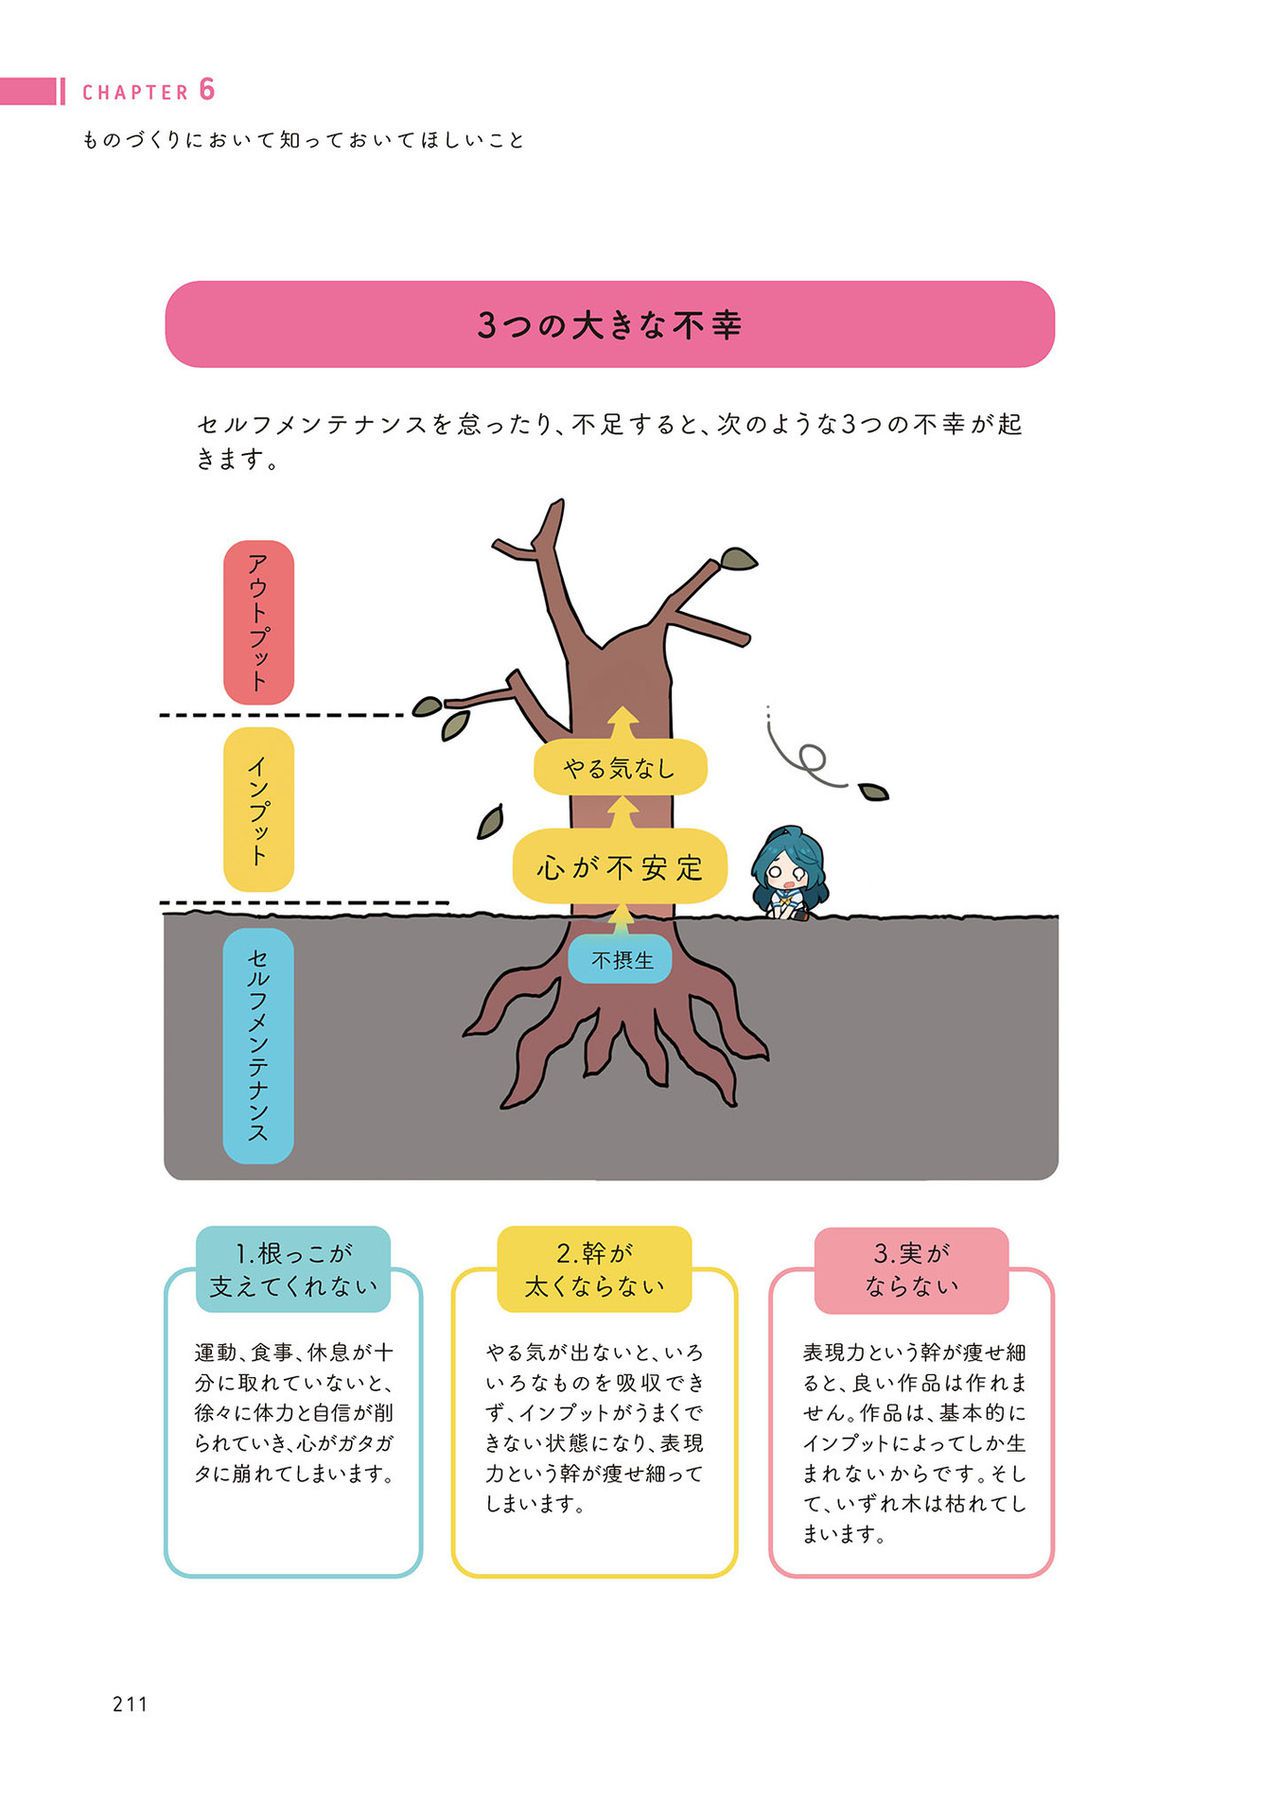 Prohibition of drawing well How to improve illustrations that are not smooth うまく描くの禁止 ツラくないイラスト上達法 212